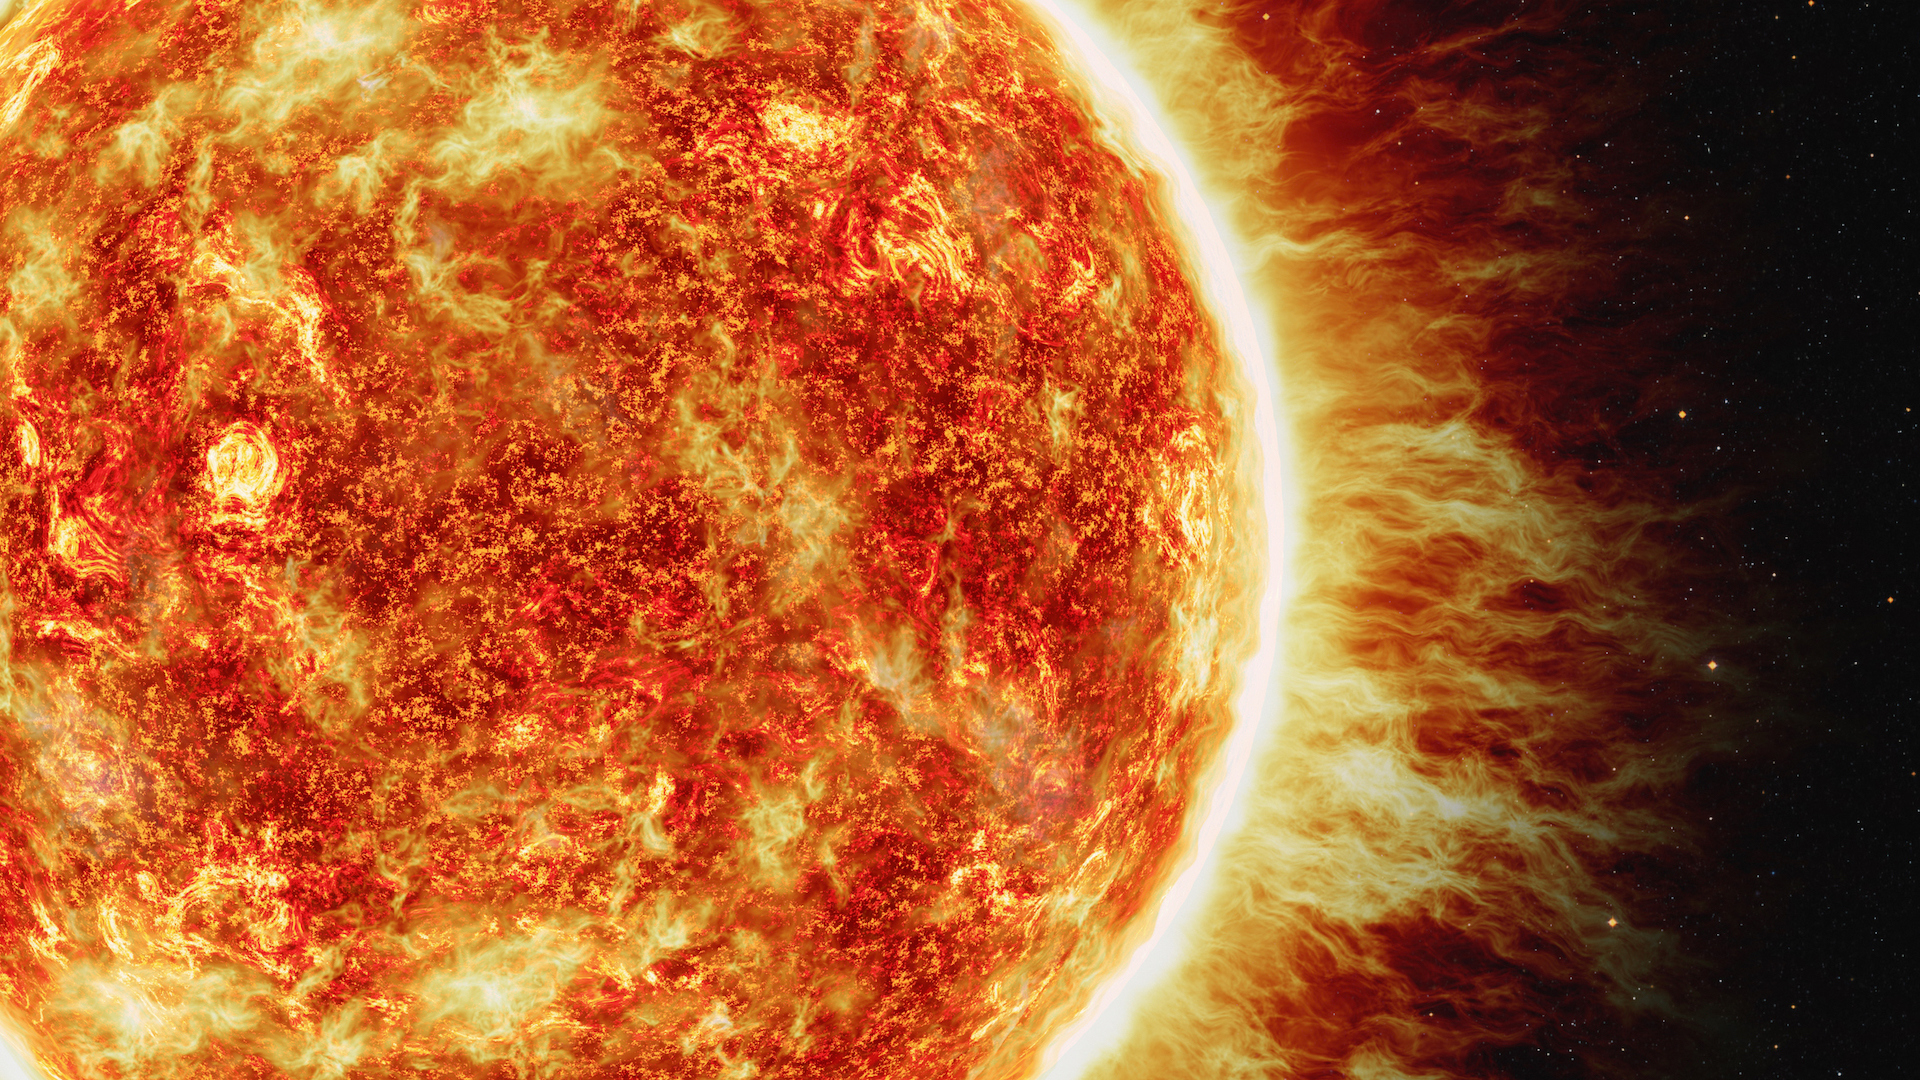 Spacecraft flying in formation near the sun could unlock new physics [Video]